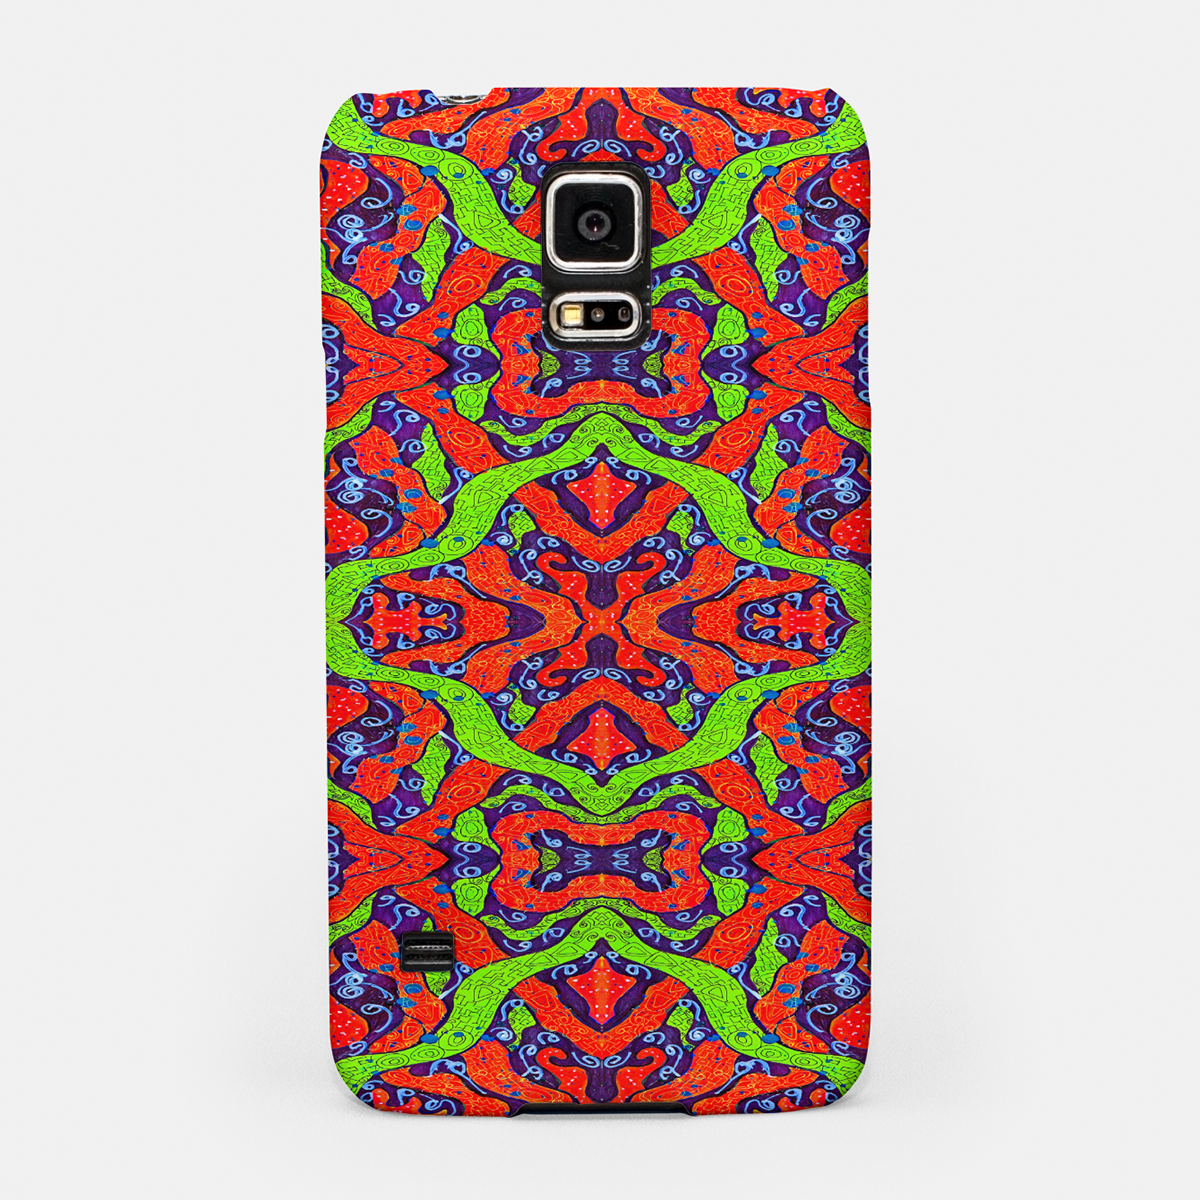 textile pattern pattern design  psychedelic product design  Fashion  Patterns trippy Textiles fluorescent